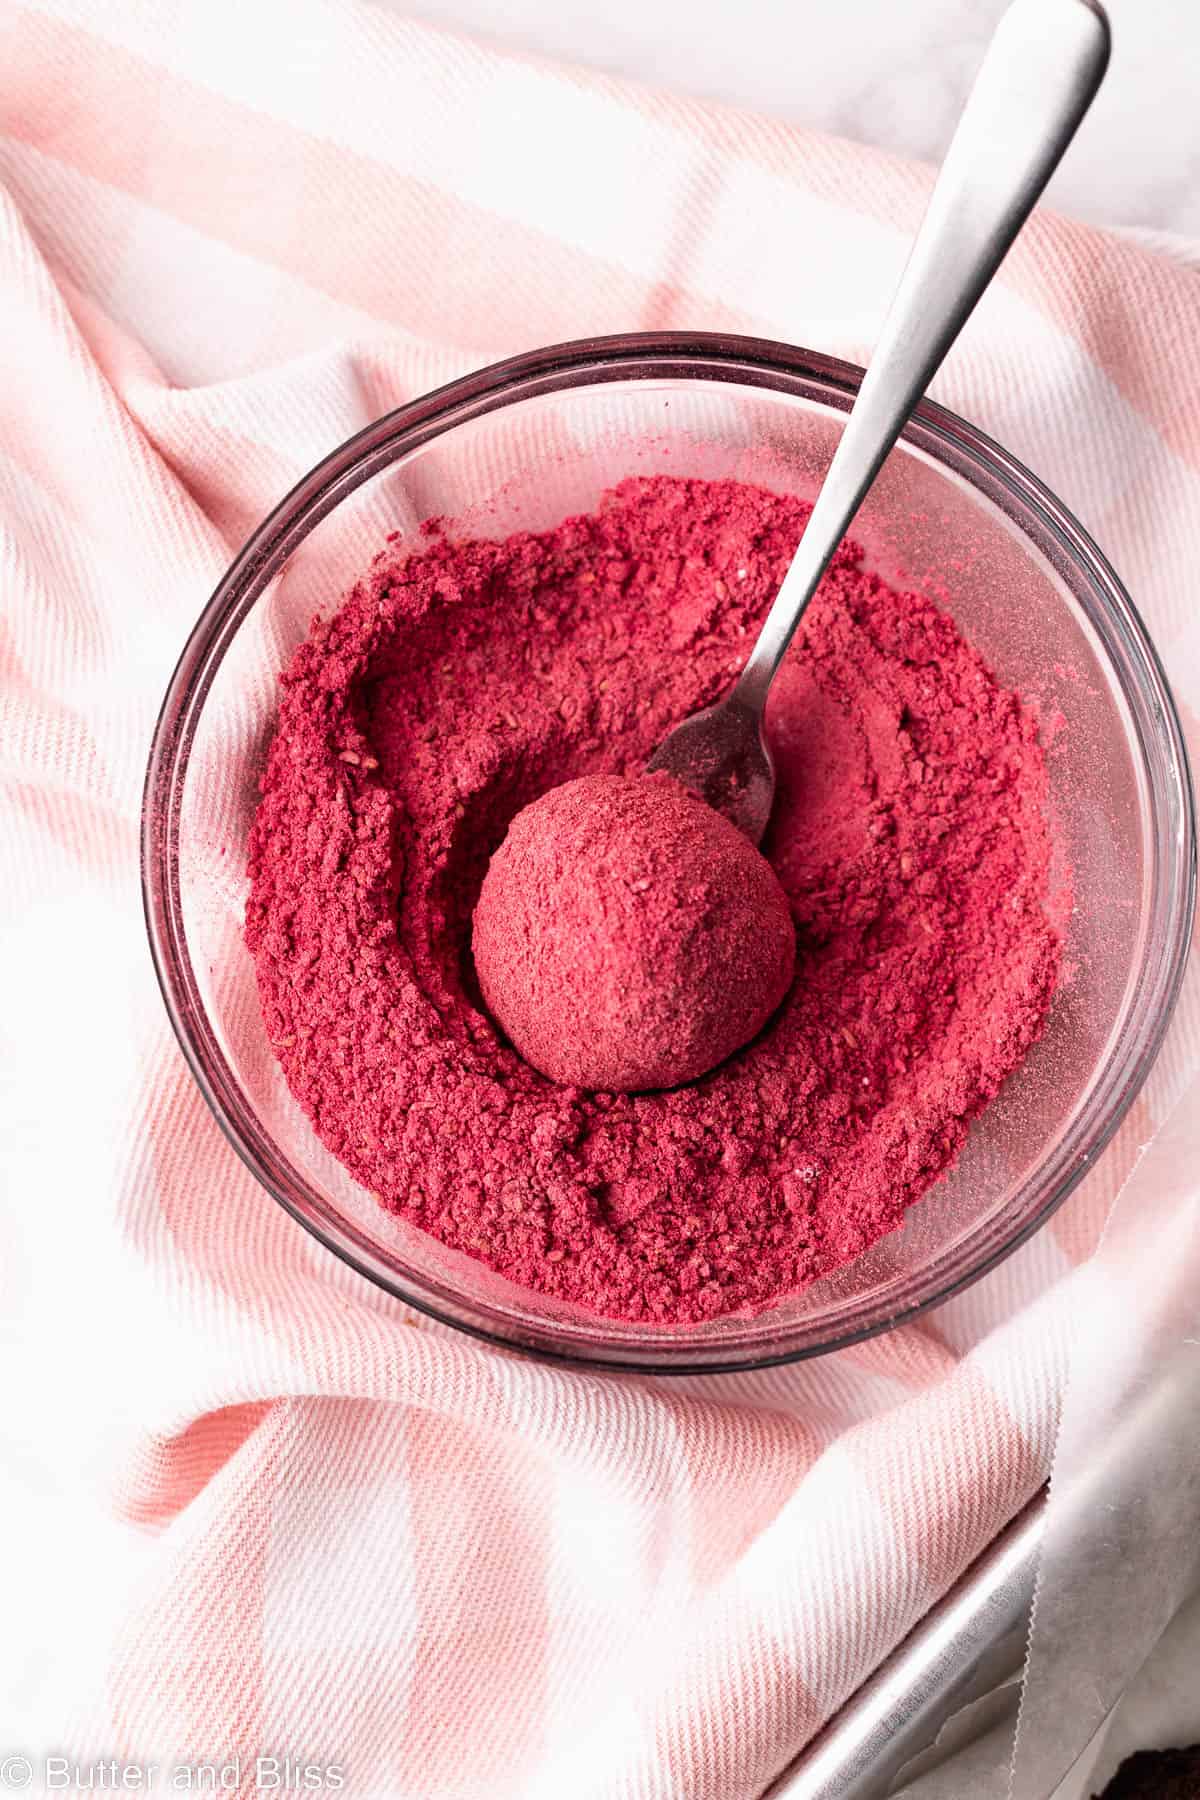 A cake bite rolled in freeze dried strawberry powder.